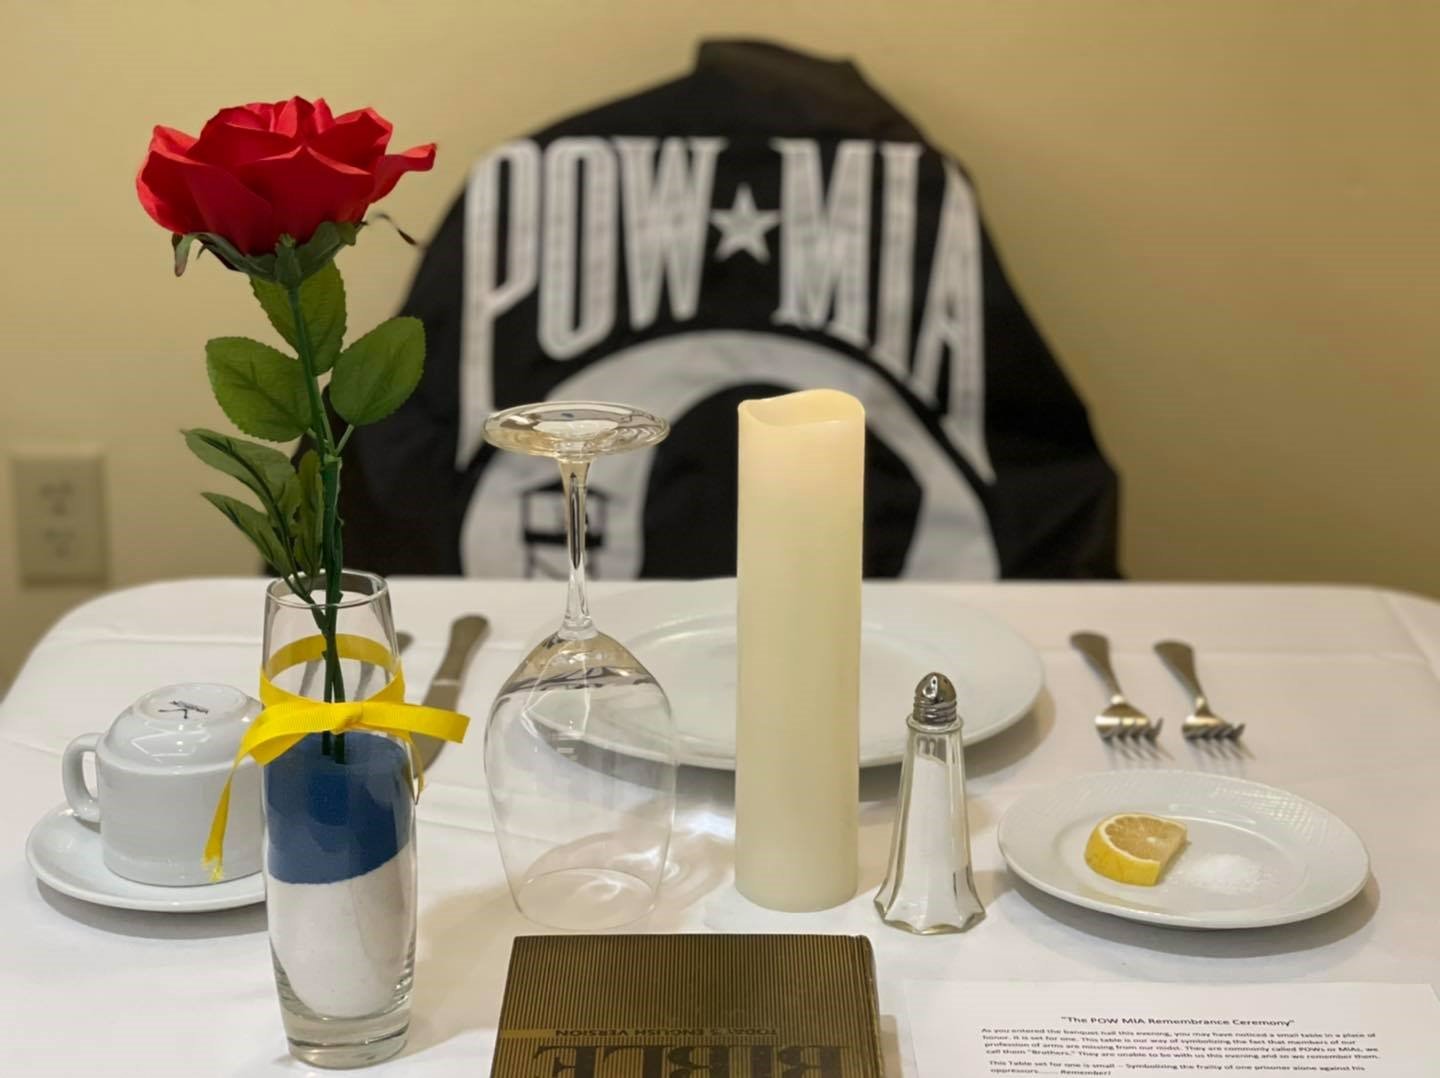 A lone table sits empty, set to remind those in attendance of the soldiers, sailors, Marines and airmen who have never returned from the conflicts America has endured over its history.